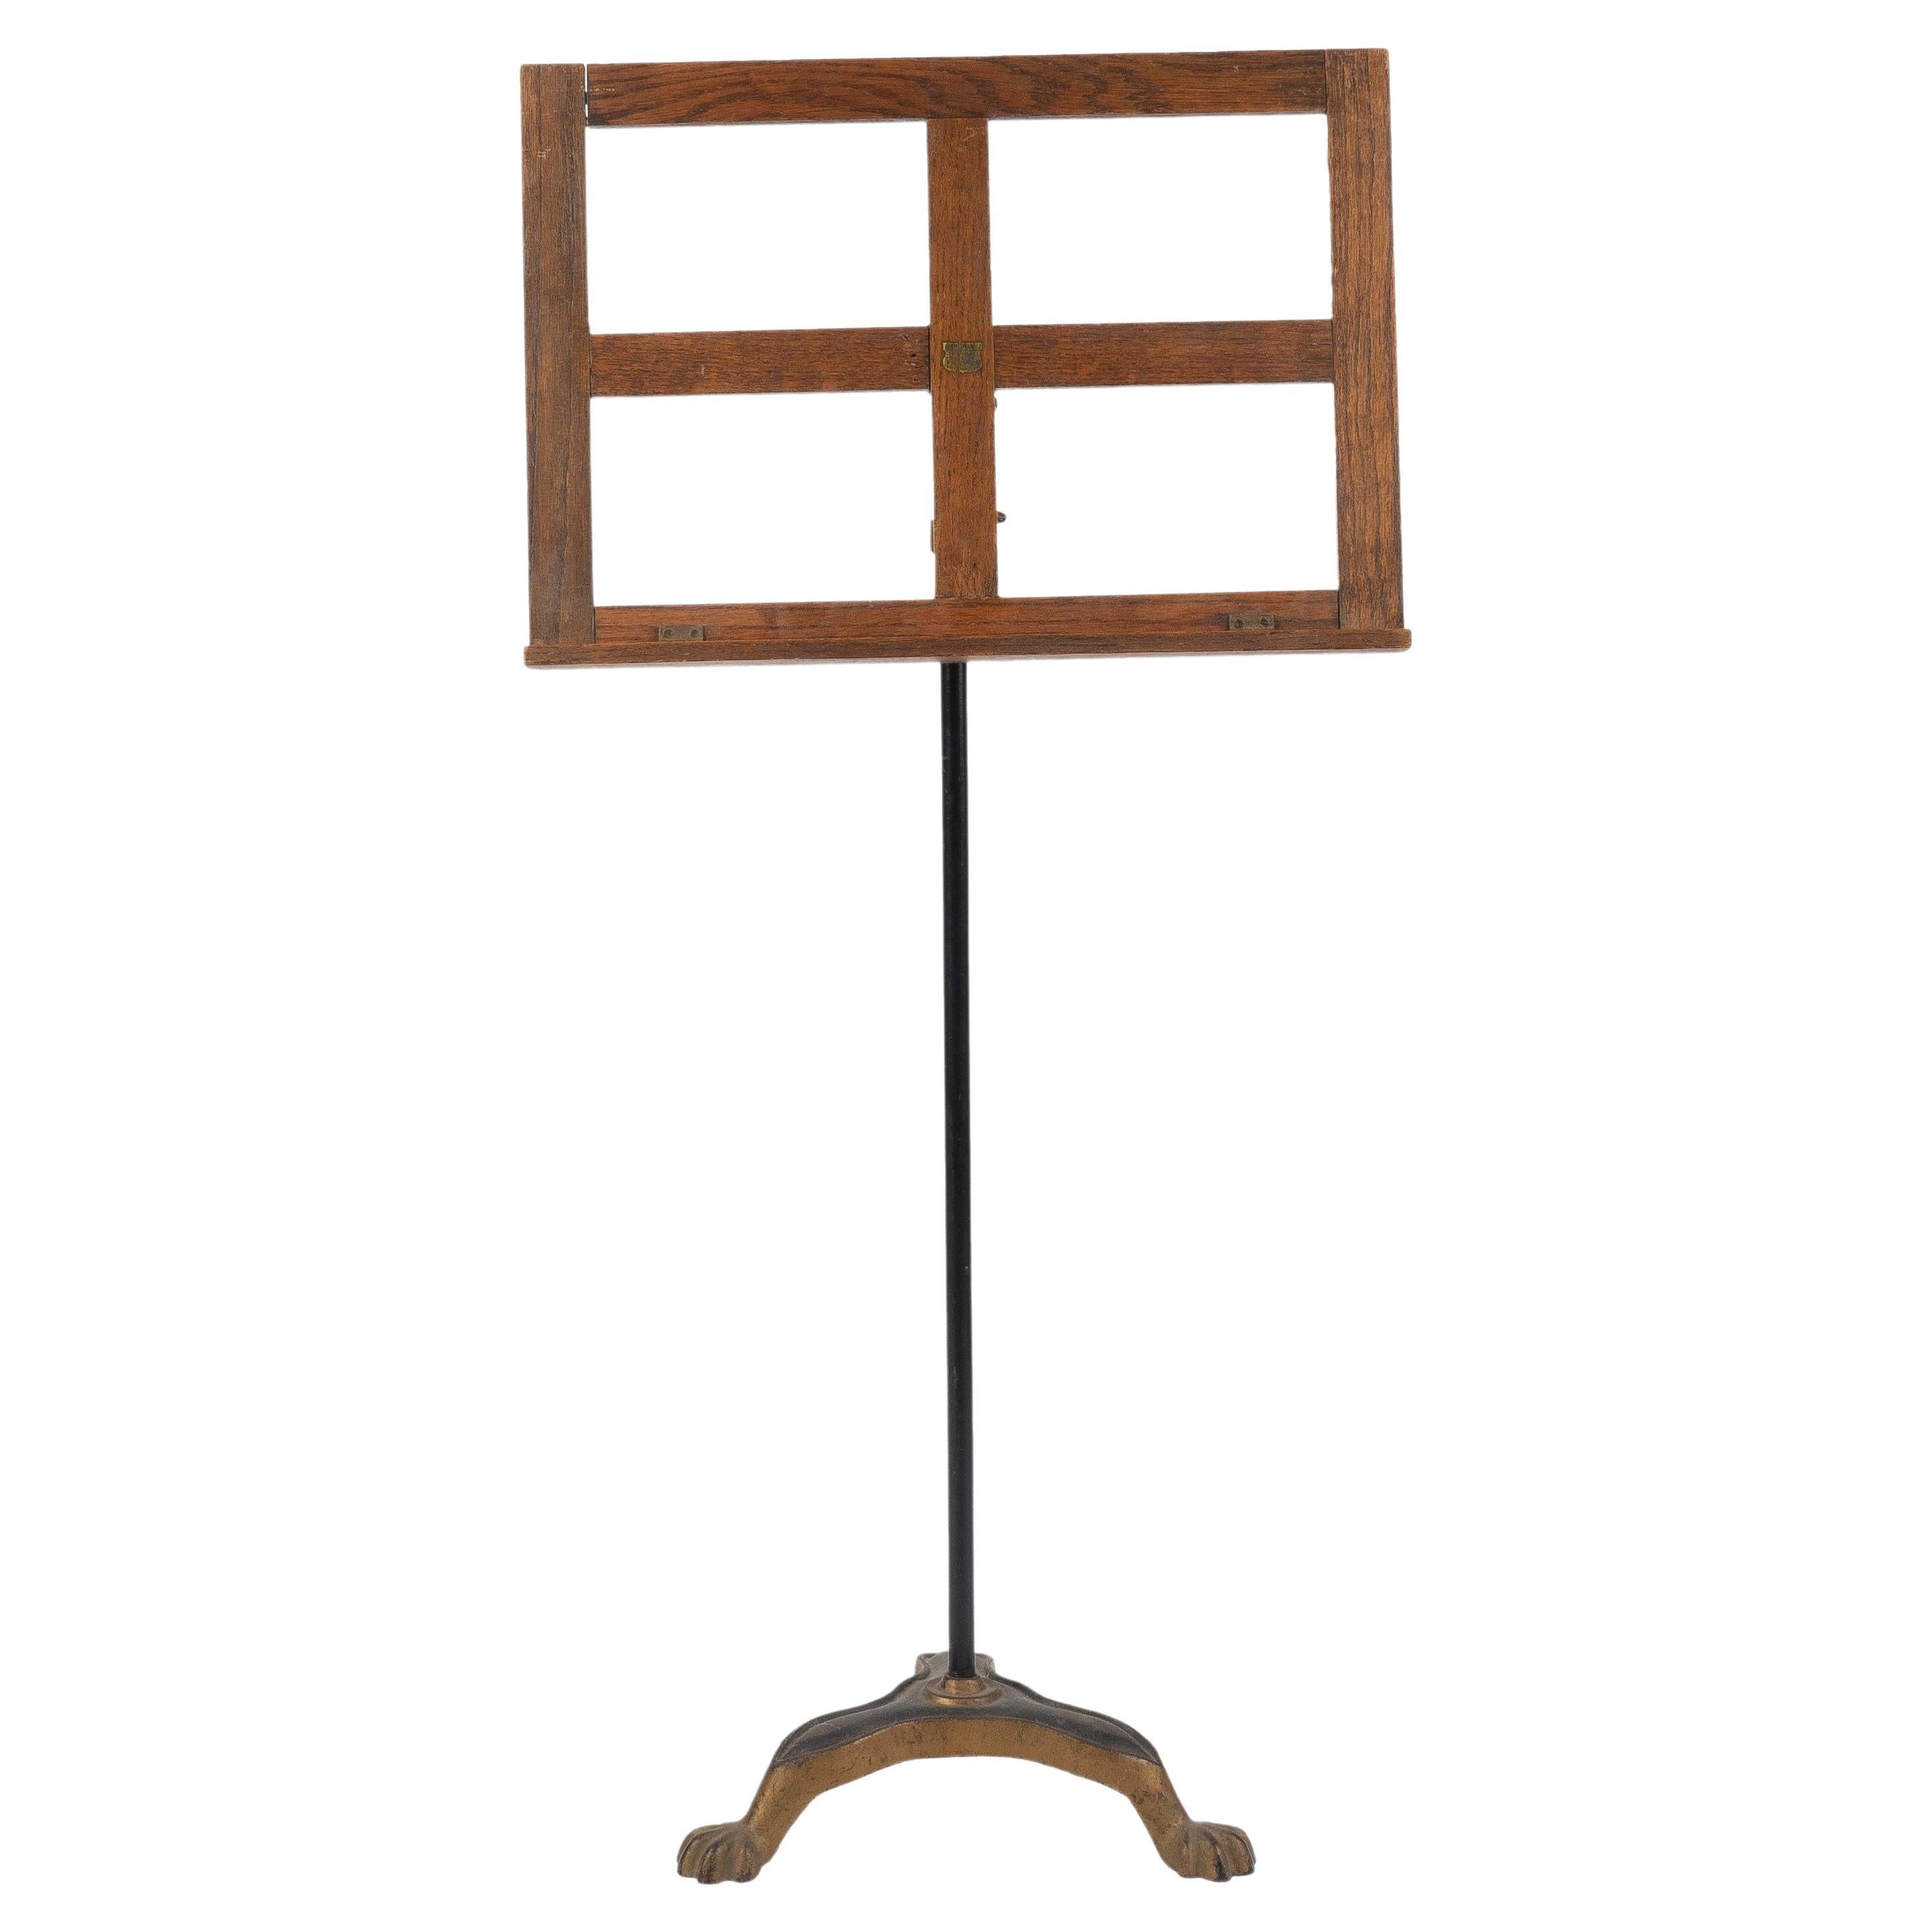 Vintage Oak Music Stand on Adjustable Iron Rod with Tripod Base by Imperial